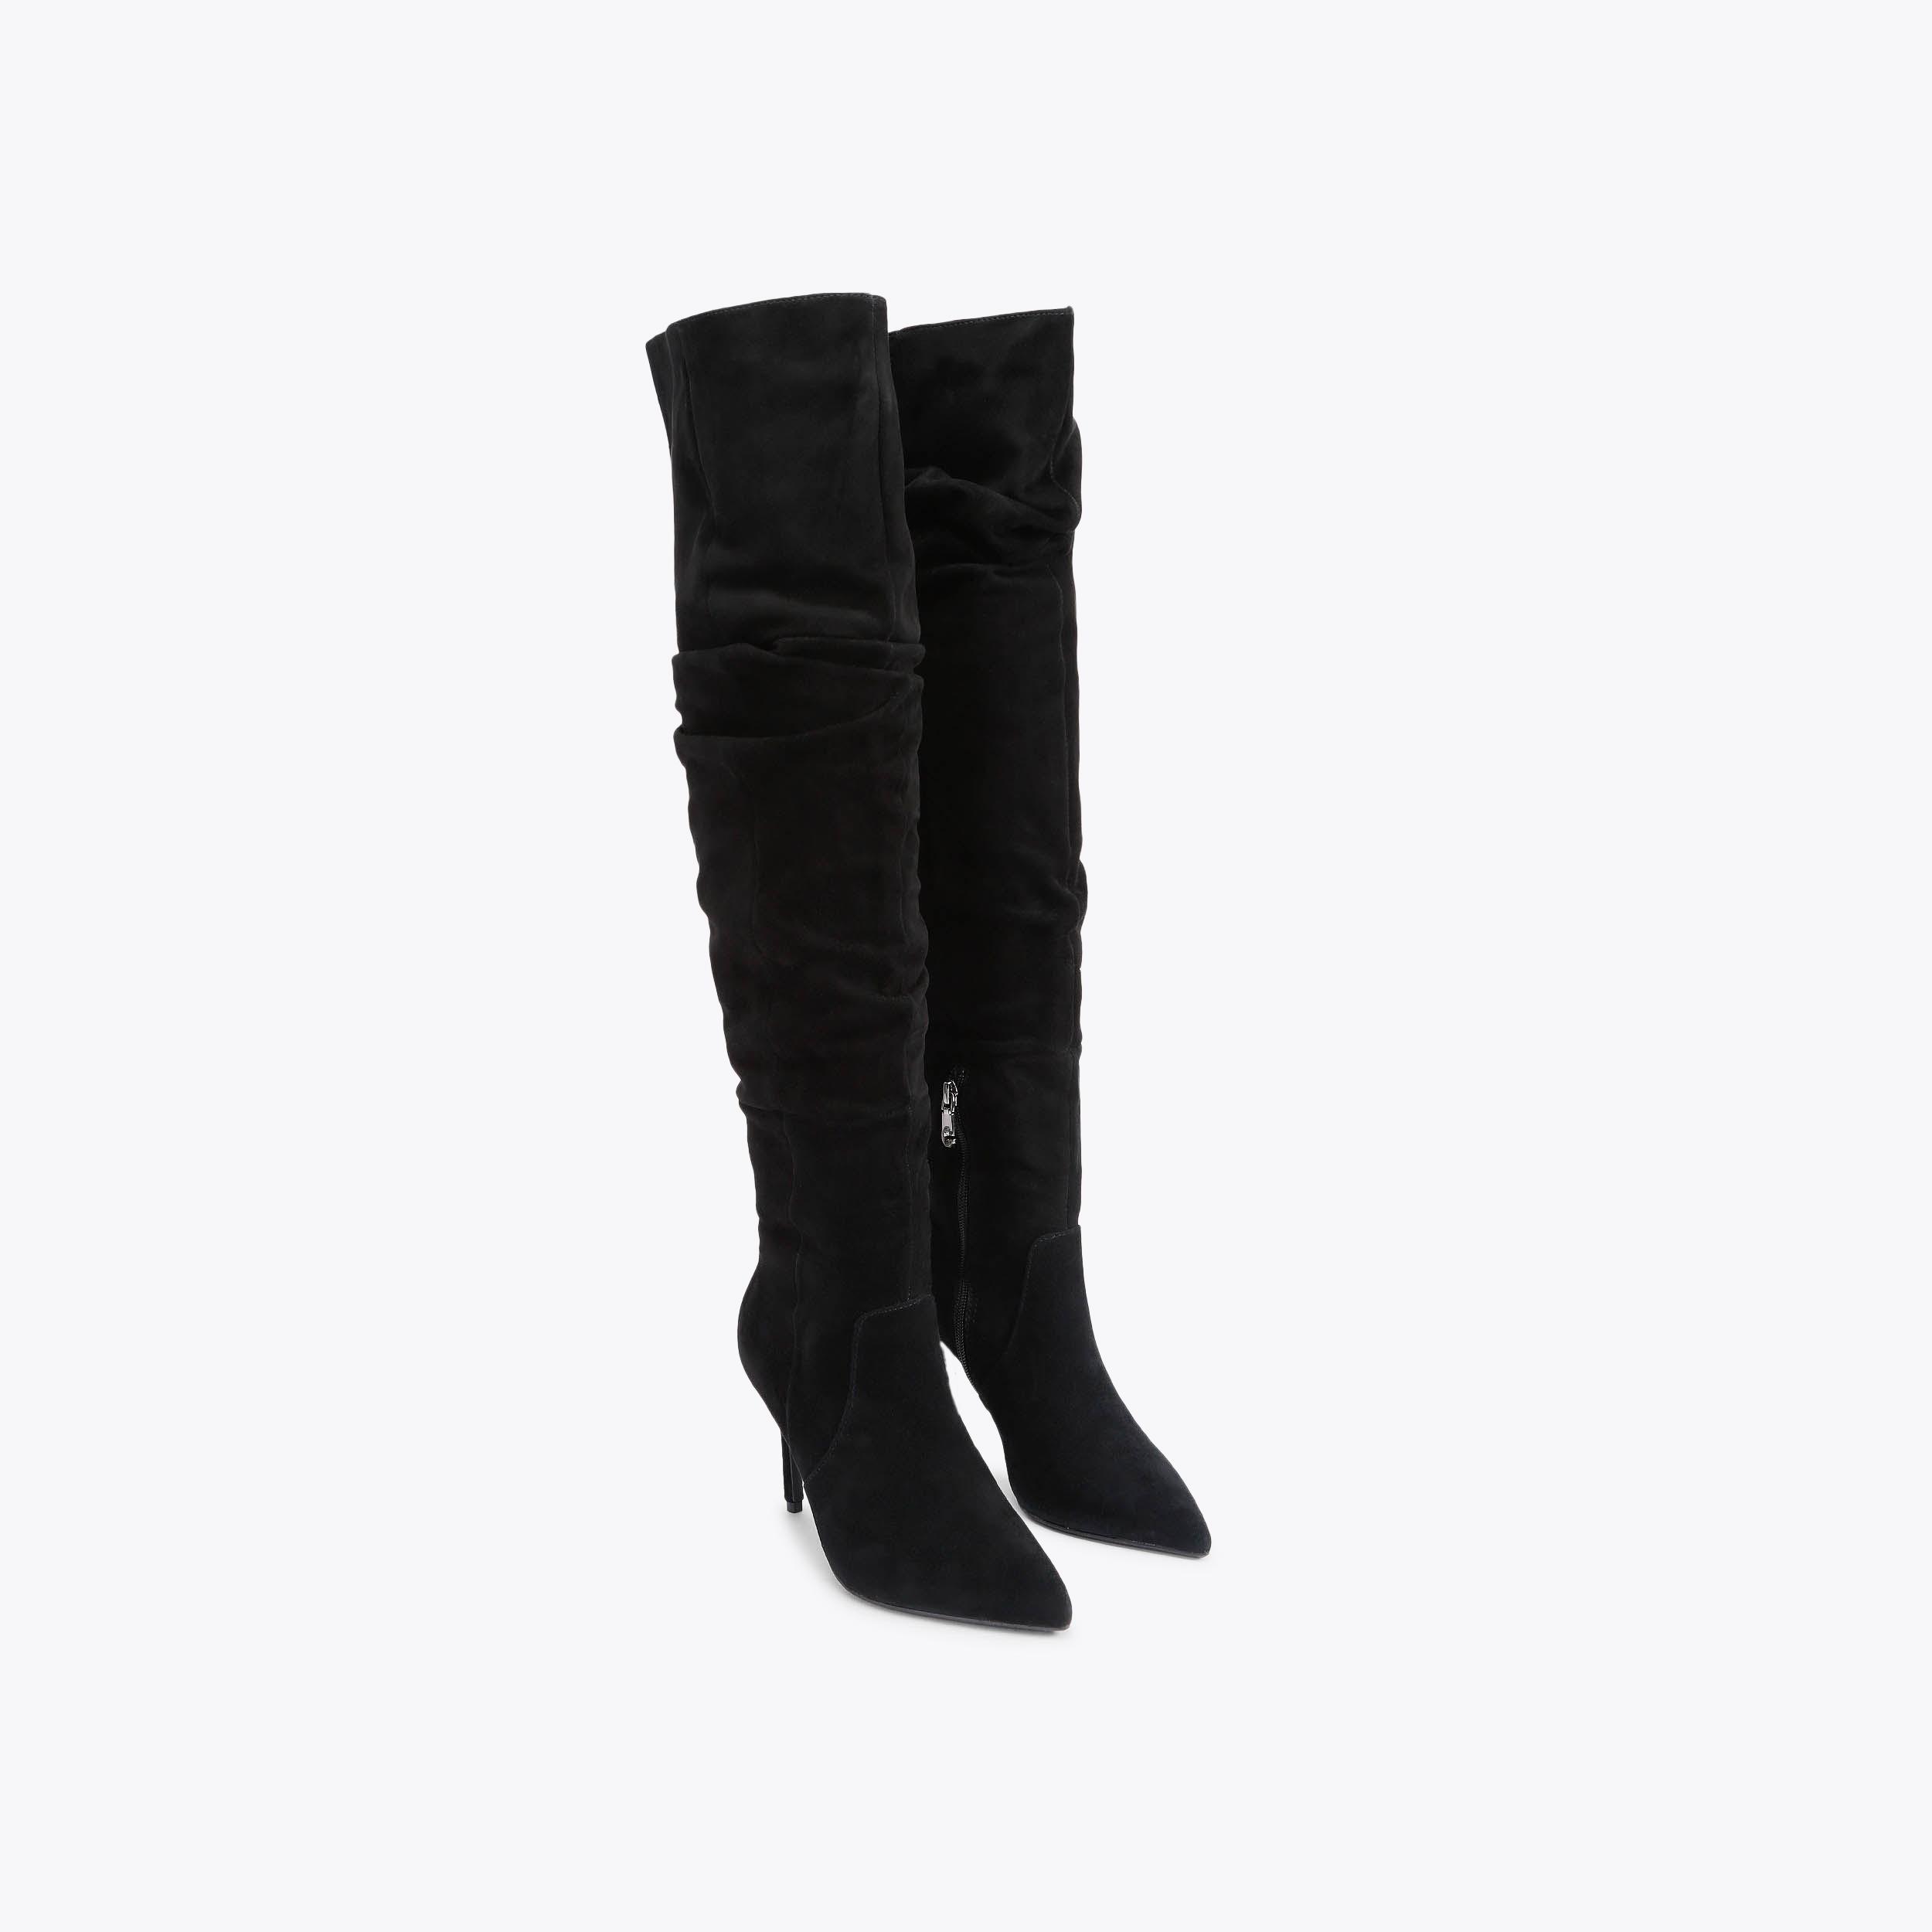 SPICY SLOUCH Black Slouch Suede Knee High Boot by CARVELA